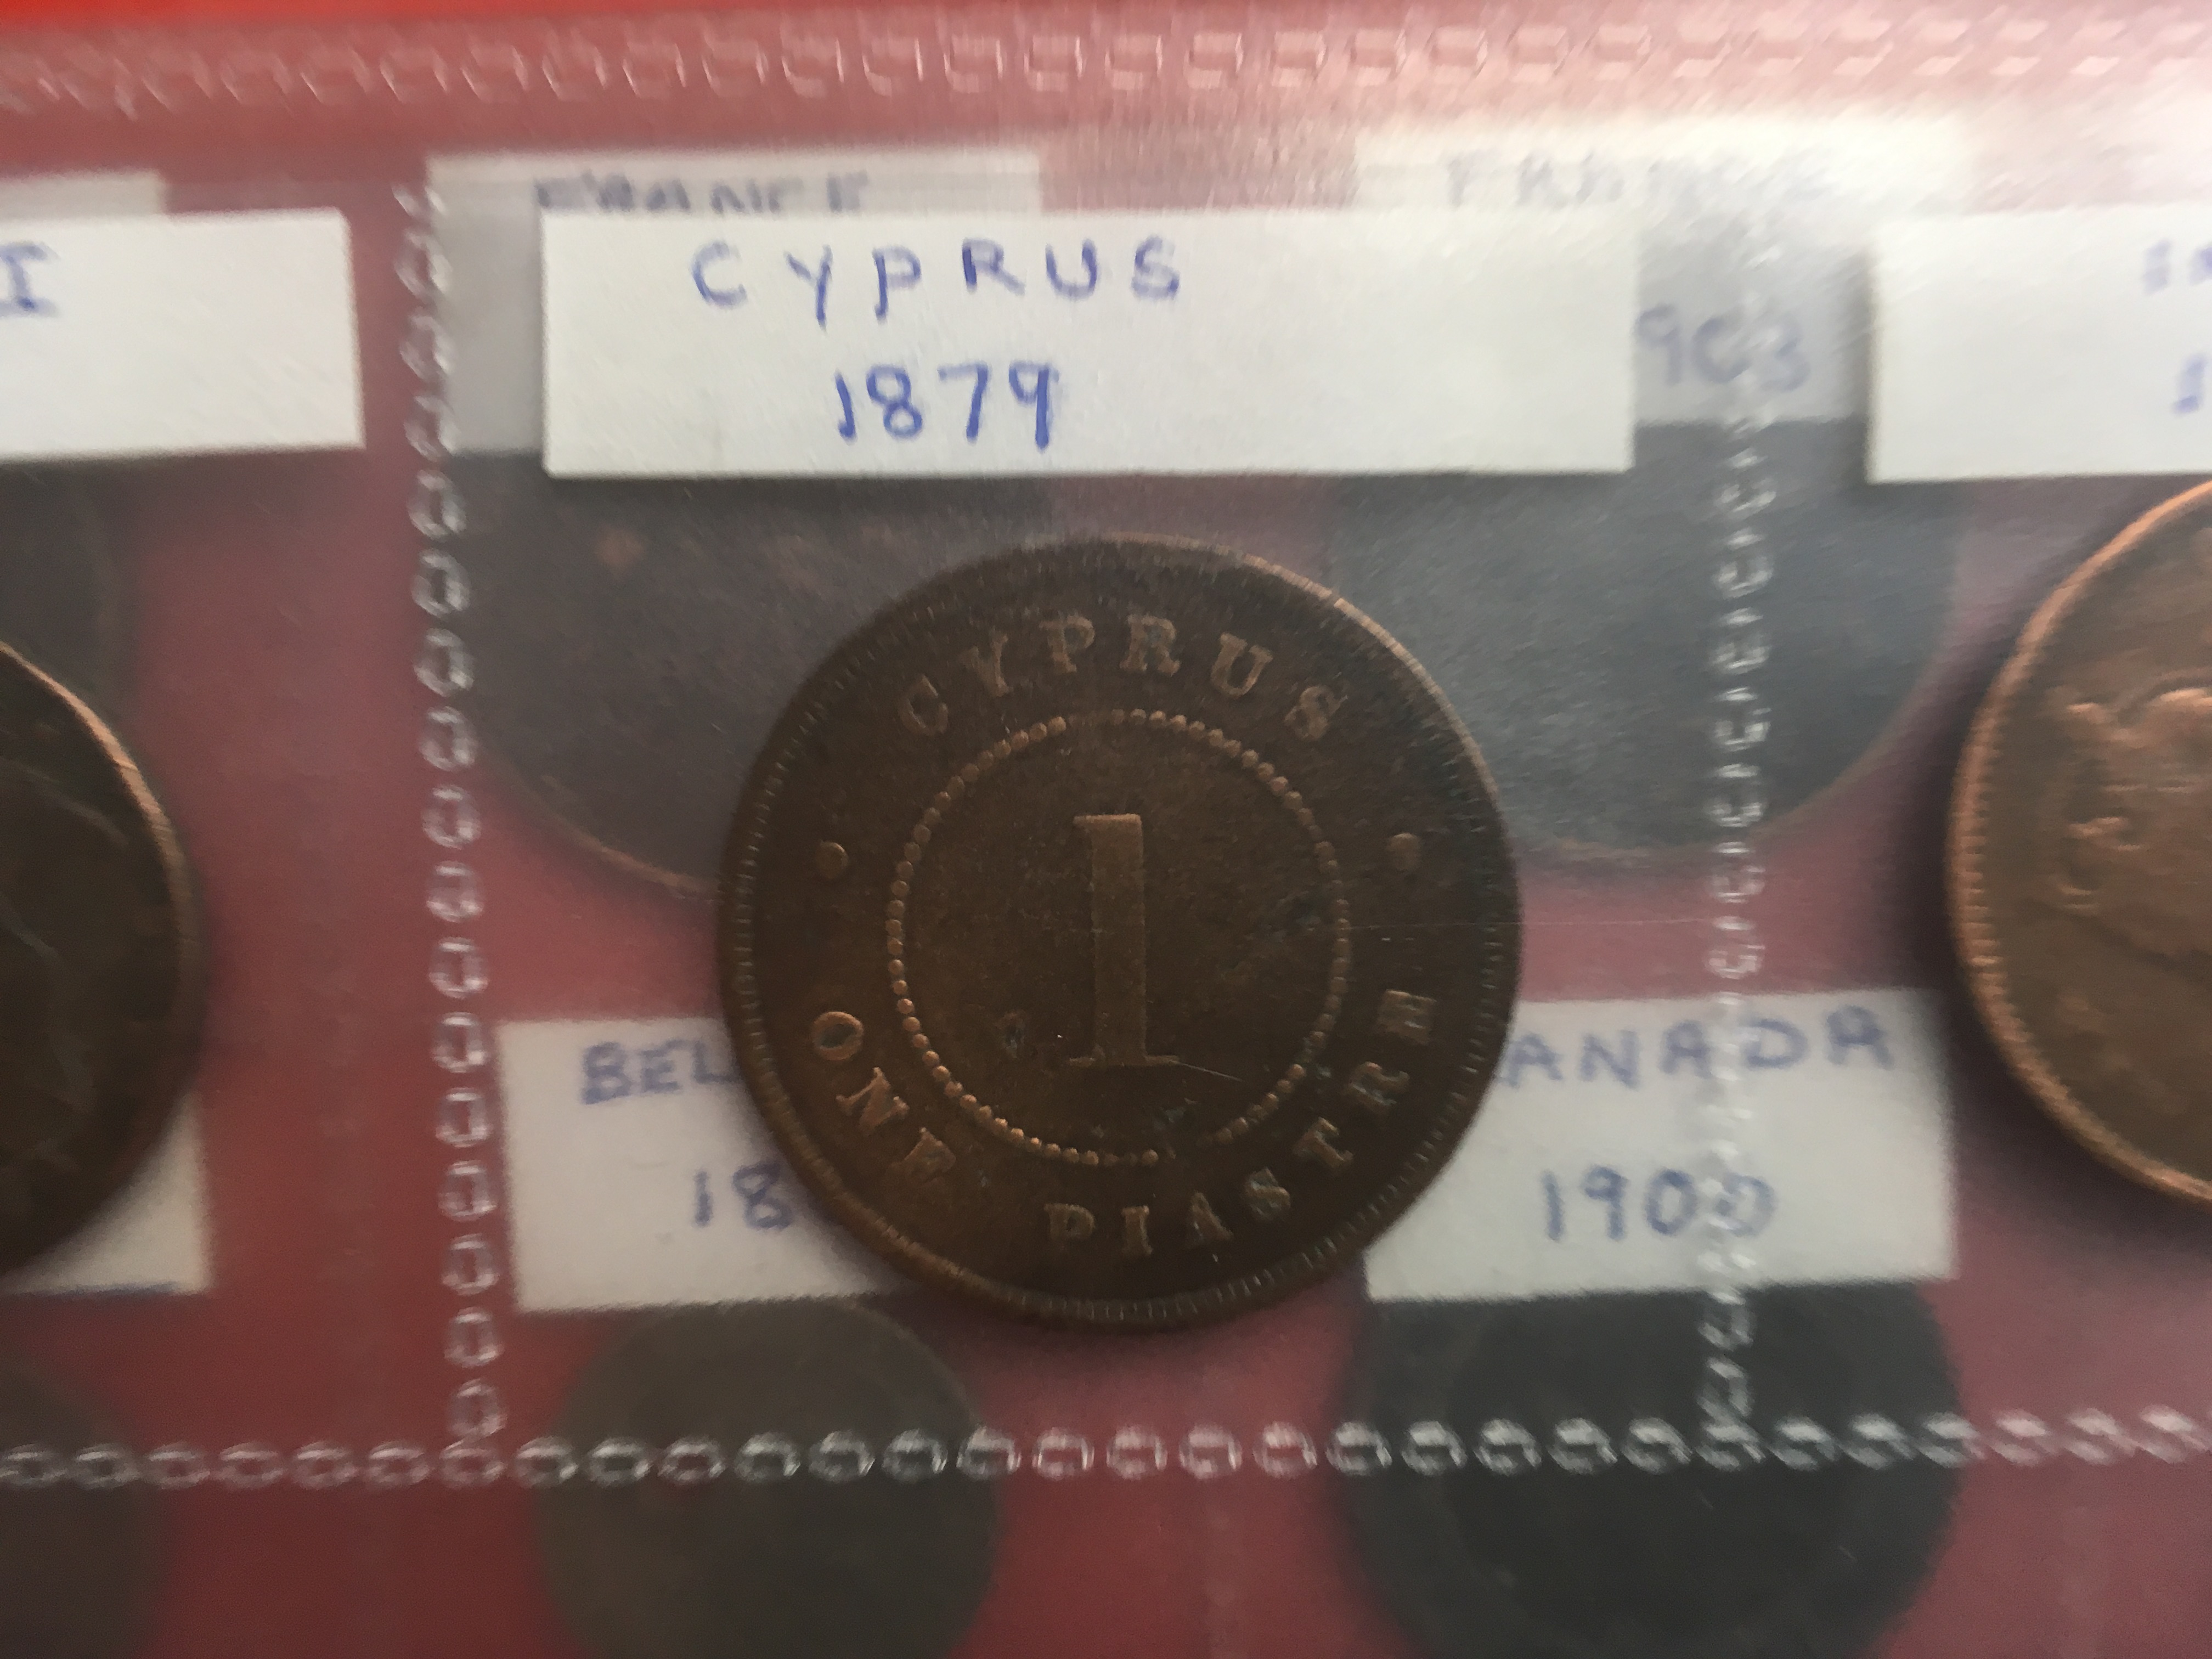 ALBUM OF MAINLY OVERSEAS COINS, CYPRUS 1879 ONE PIASTRE, SILVER WITH USA, GERMANY, ETC. (APPROX. - Image 5 of 8